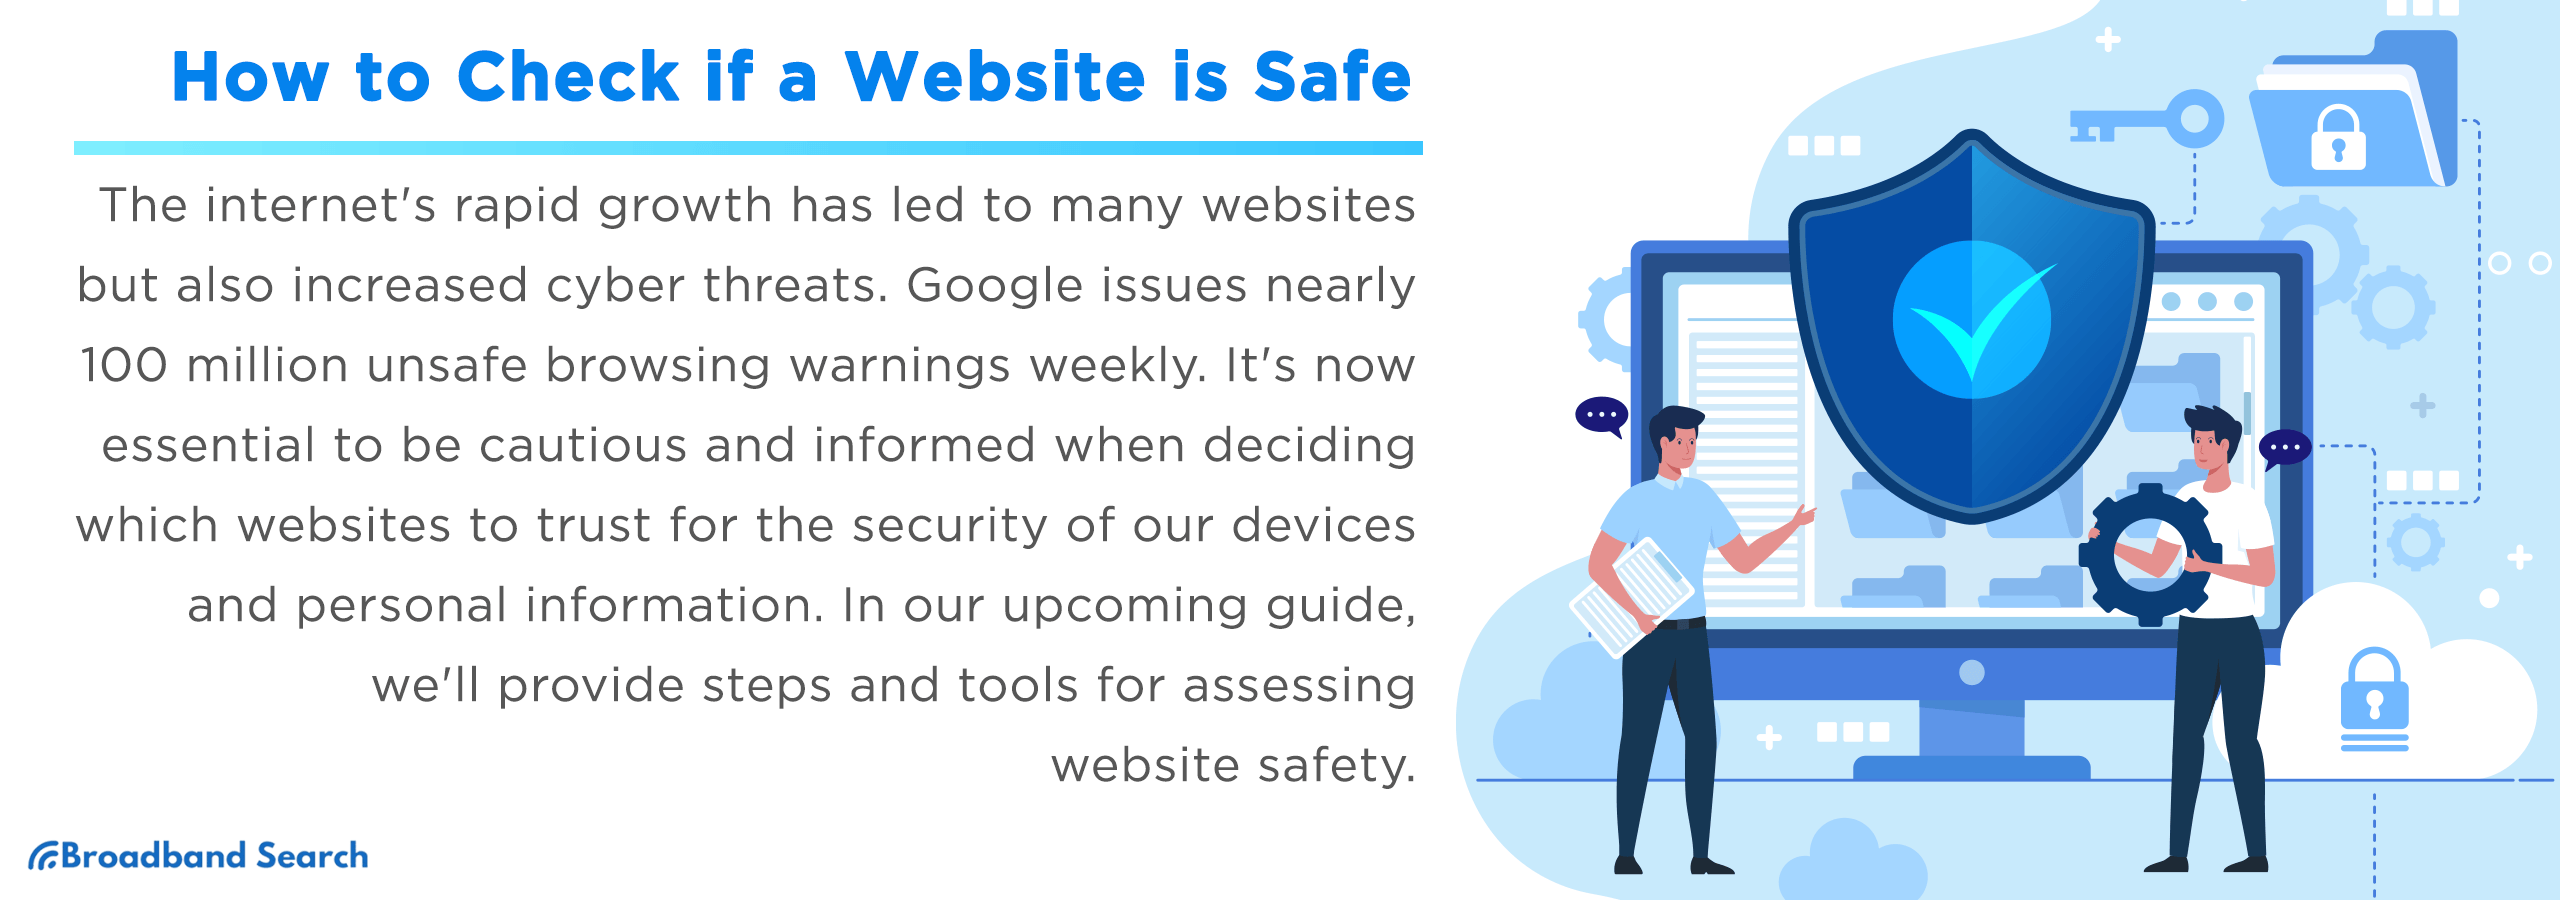 How to Check if a Website is Safe and Legitimate - The Ultimate Guide